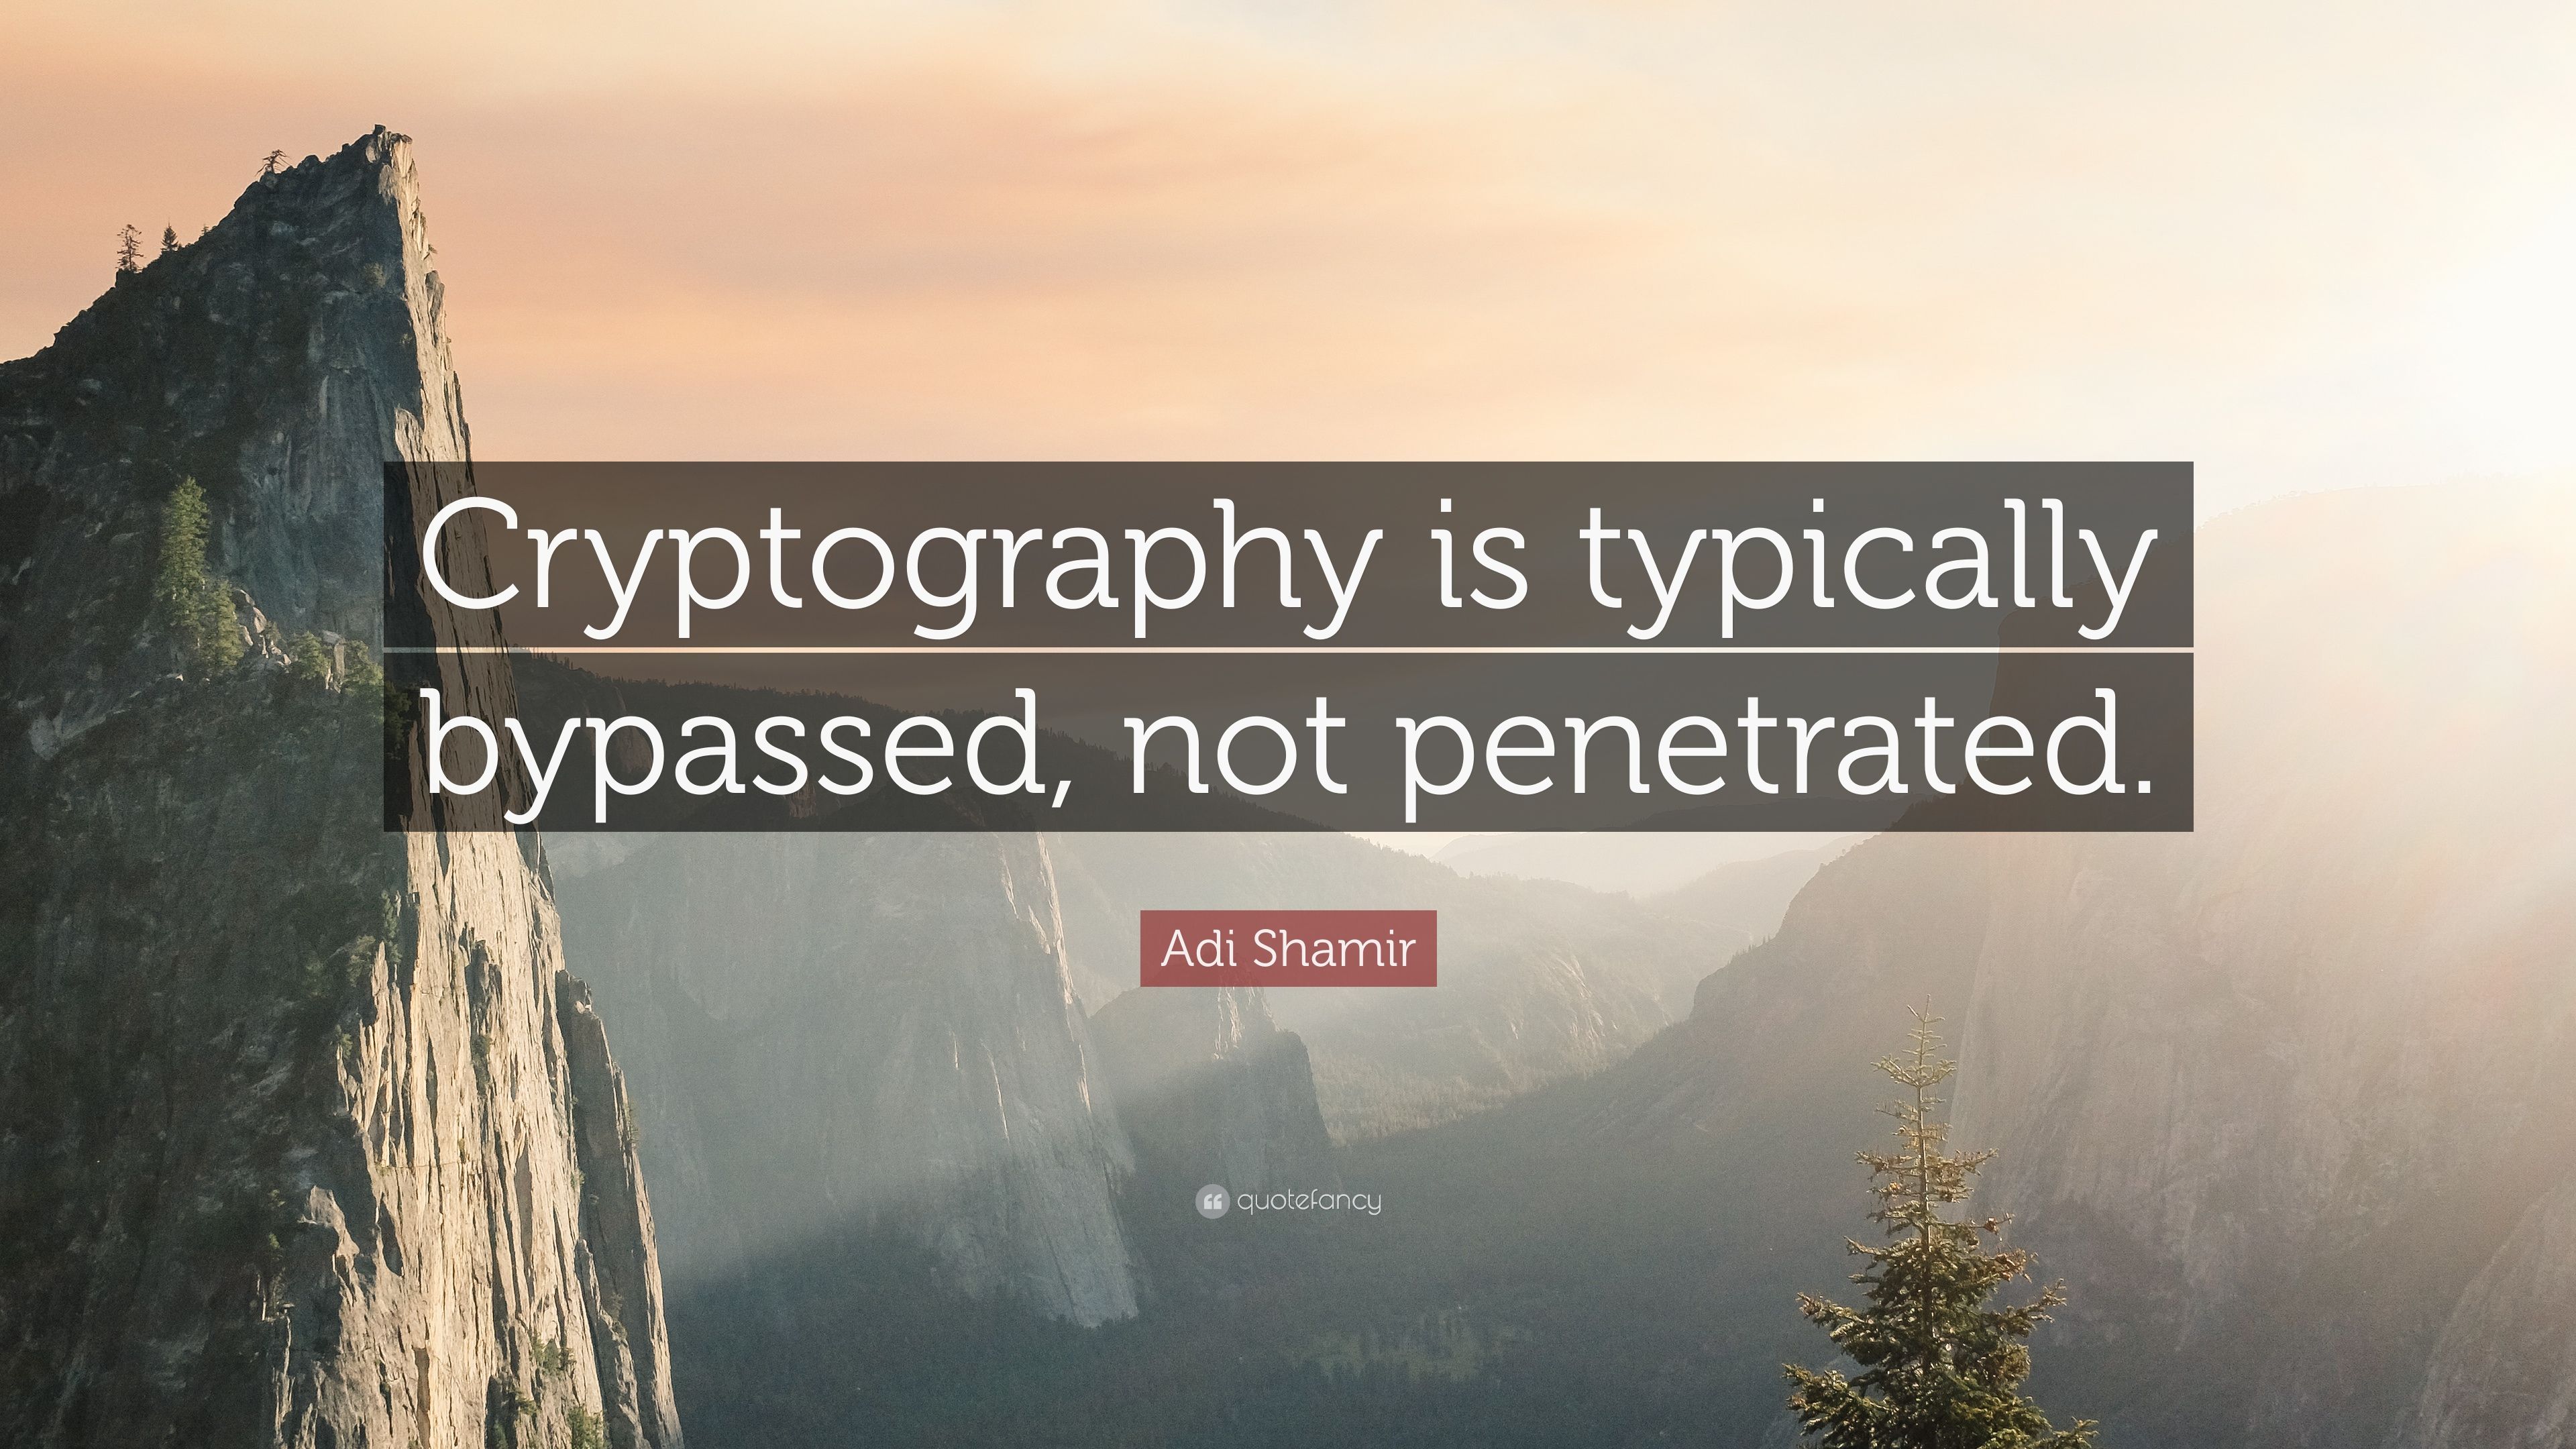 Adi Shamir Quote: “Cryptography is typically bypassed, not penetrated.”